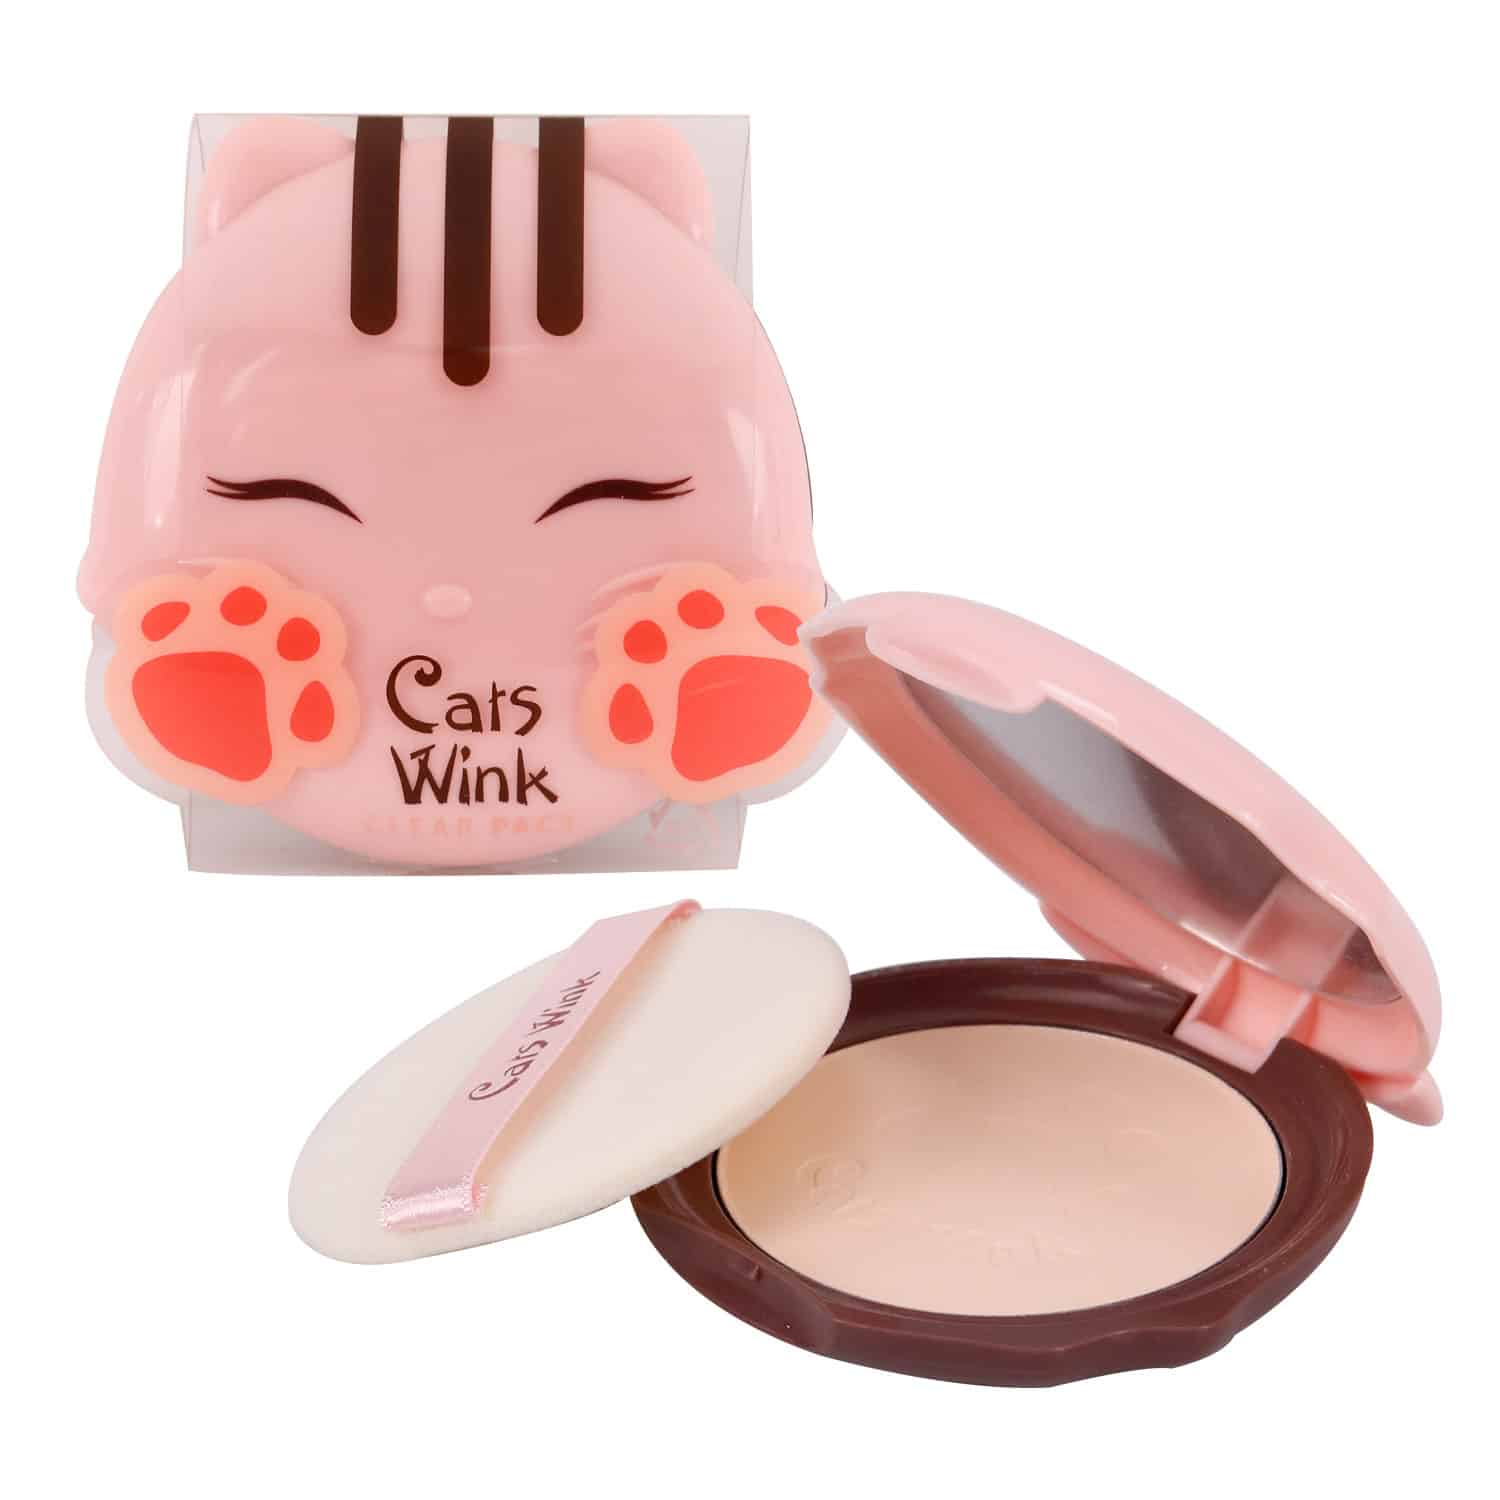 Tony-Moly-Cats-Wink-Clear-Compact